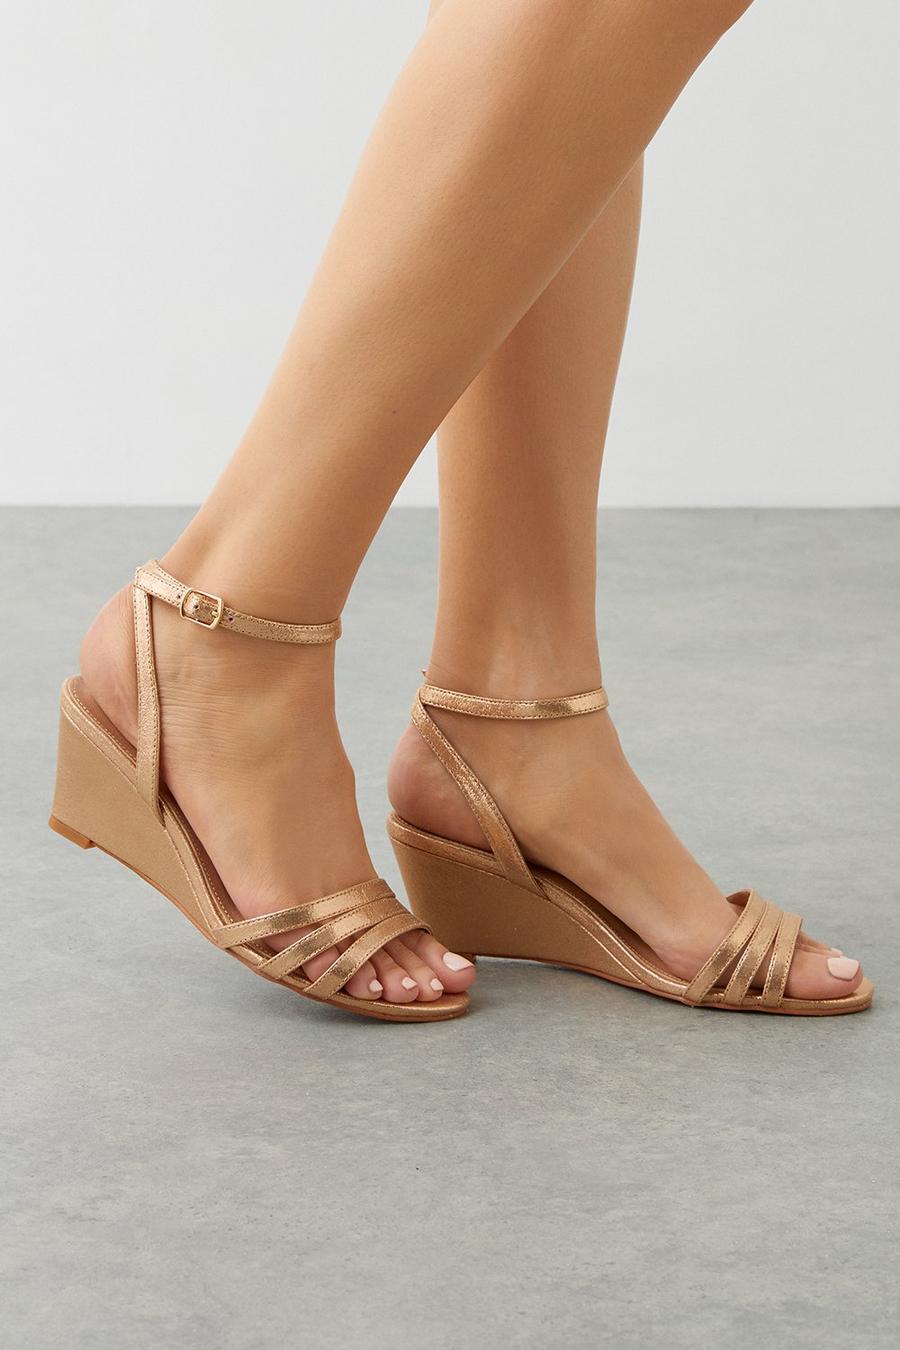 Good For The Sole: Wide Fit Angelina Wedge Heel Sandals